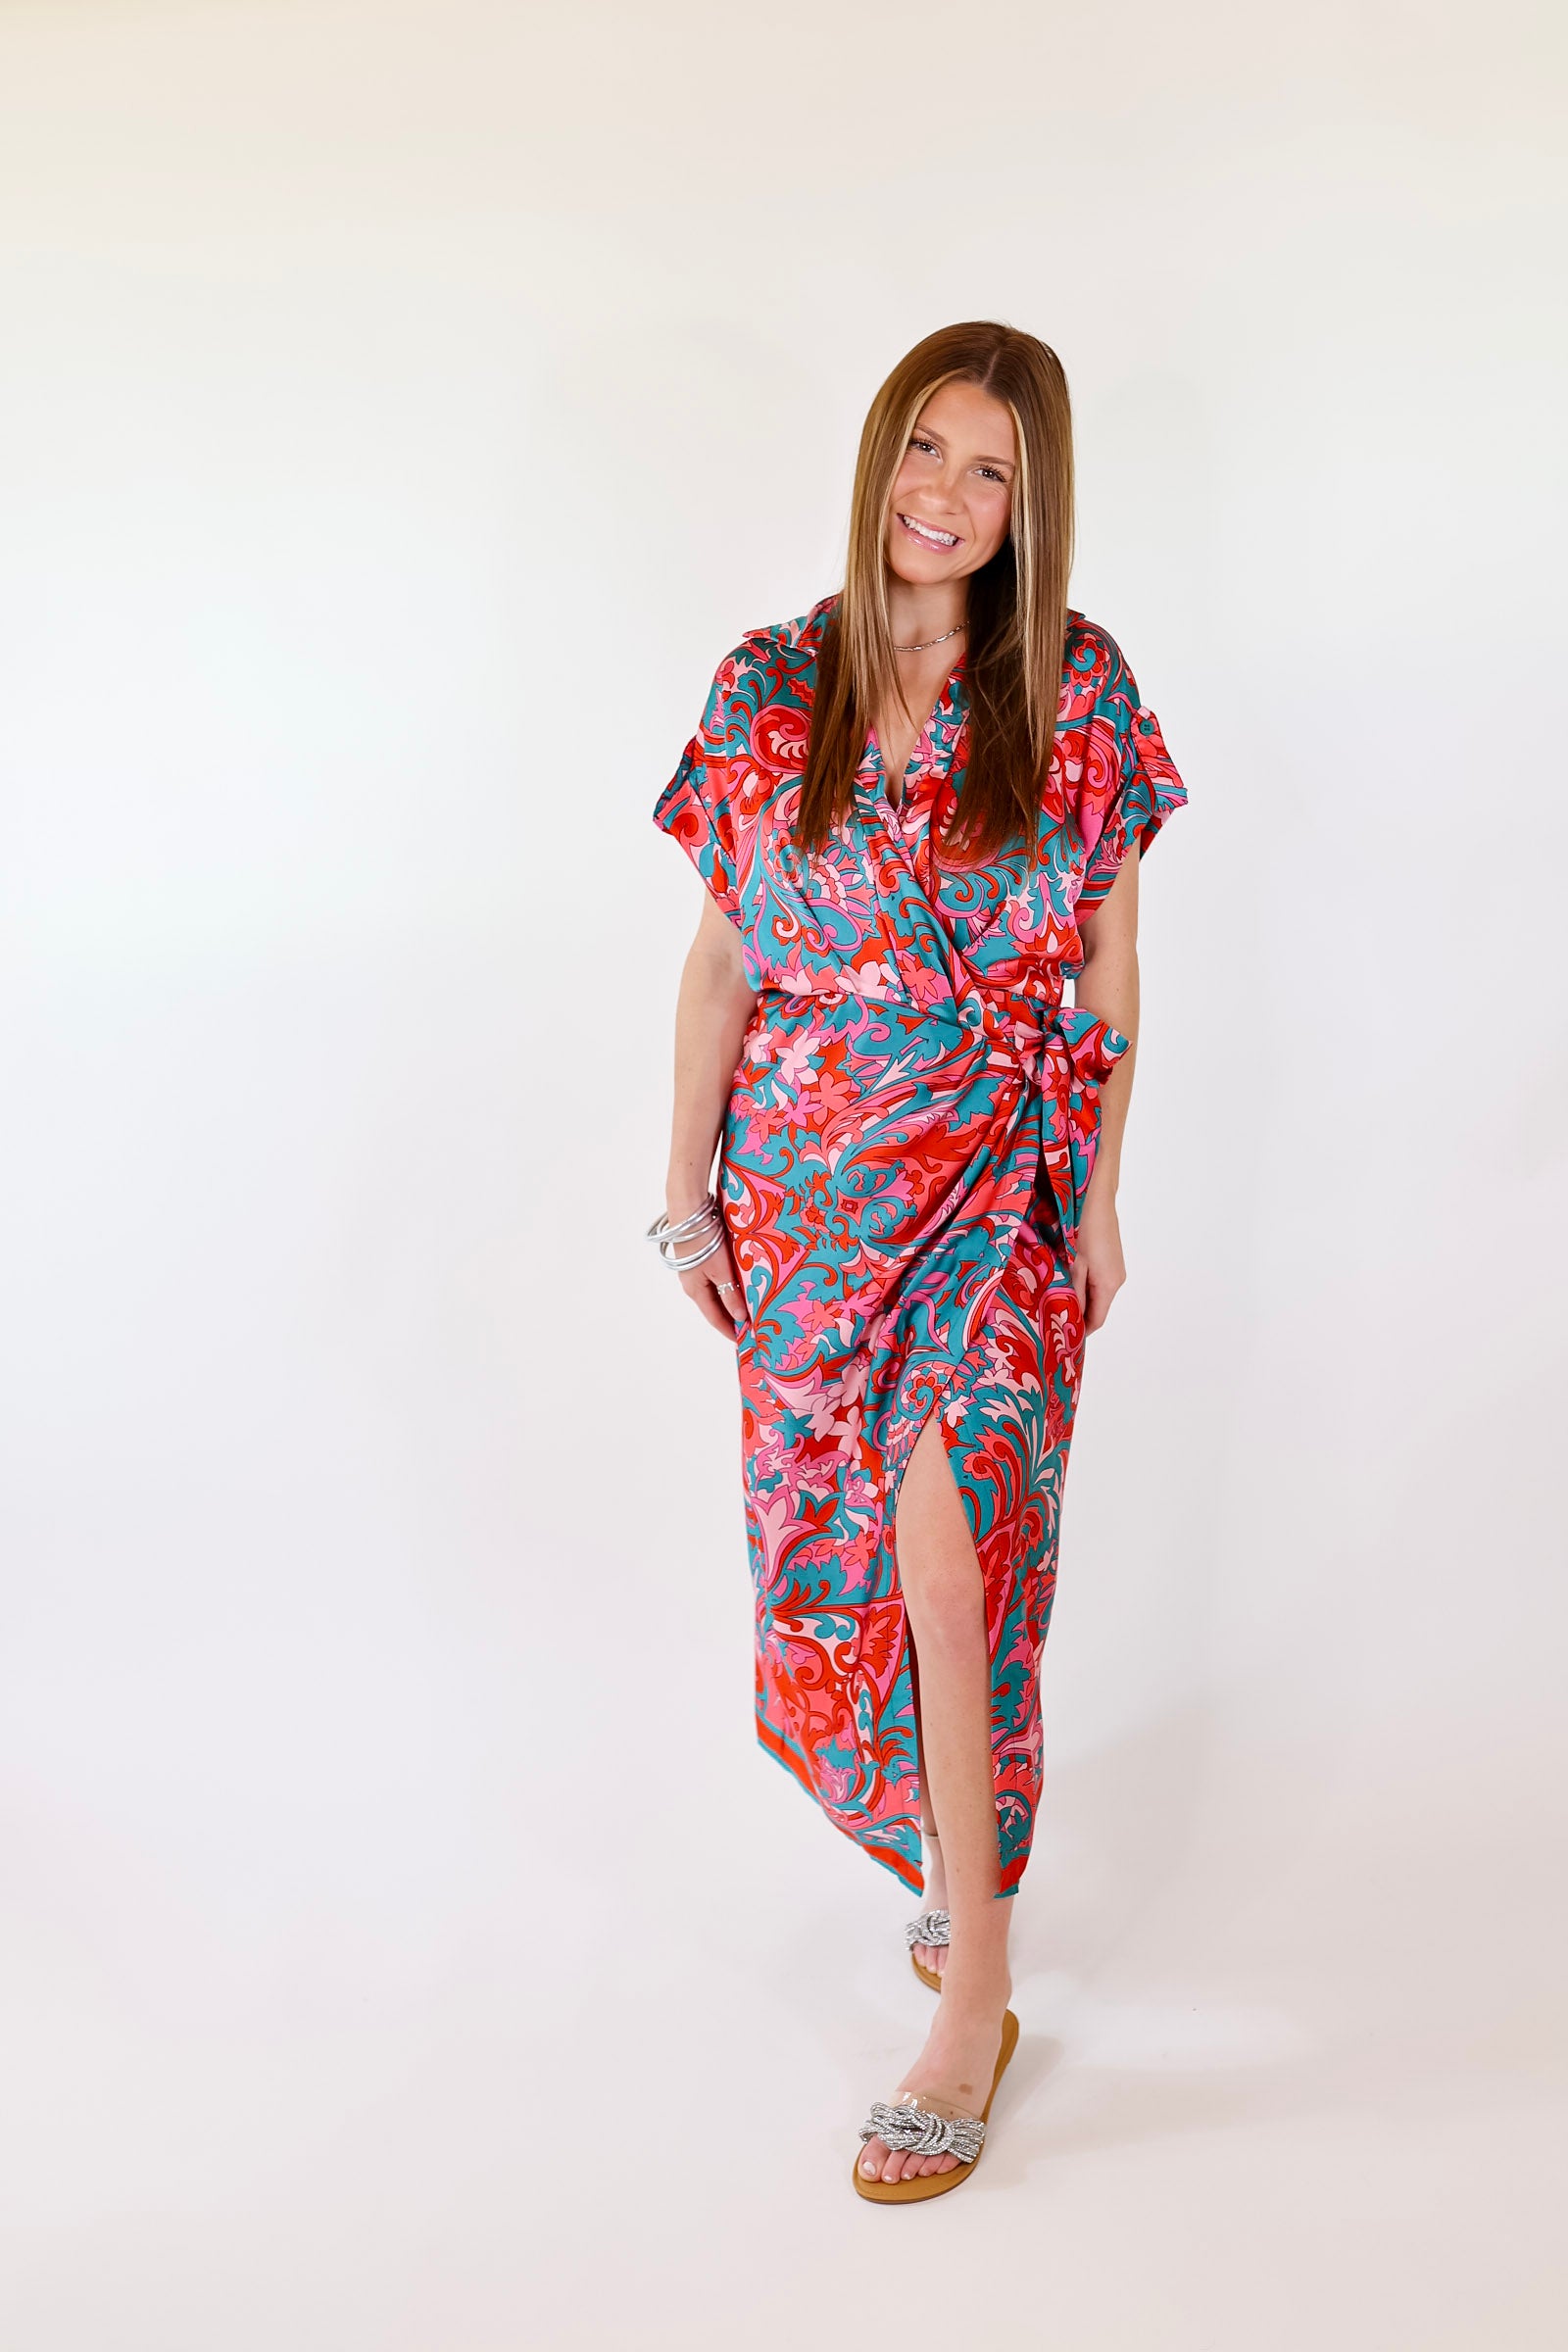 Room With A View Baroque Print Wrap Midi Dress in Pink and Teal - Giddy Up Glamour Boutique